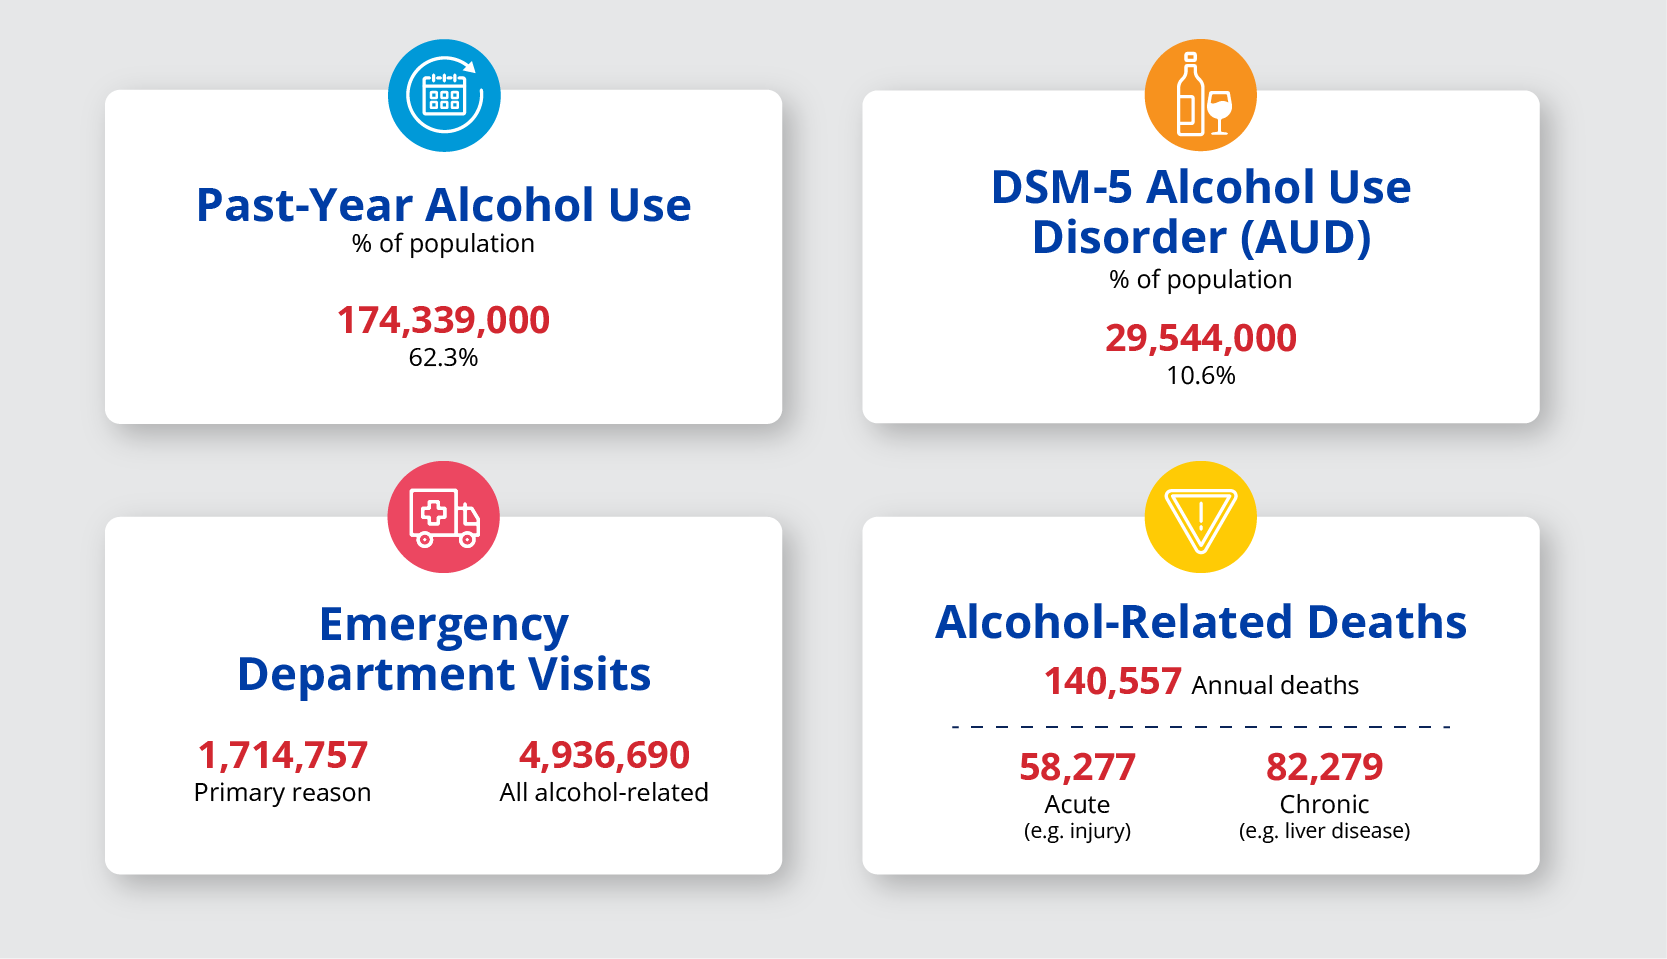 Past-Year Alcohol Use (% of population) - 174,339,000 (62.3%)
DSM-5 Alcohol Use Disorder (AUD) (% of population) - 29,544,000 (10.6%)
Emergency Department Visits - 1,714,757 Primary Reason, 4,936,690 All alcohol-related
Alcohol-Related Deaths - 140,557 Annual deaths / 58,277 Acute (e.g. injury) 82,279 Chronic (e.g. liver disease)